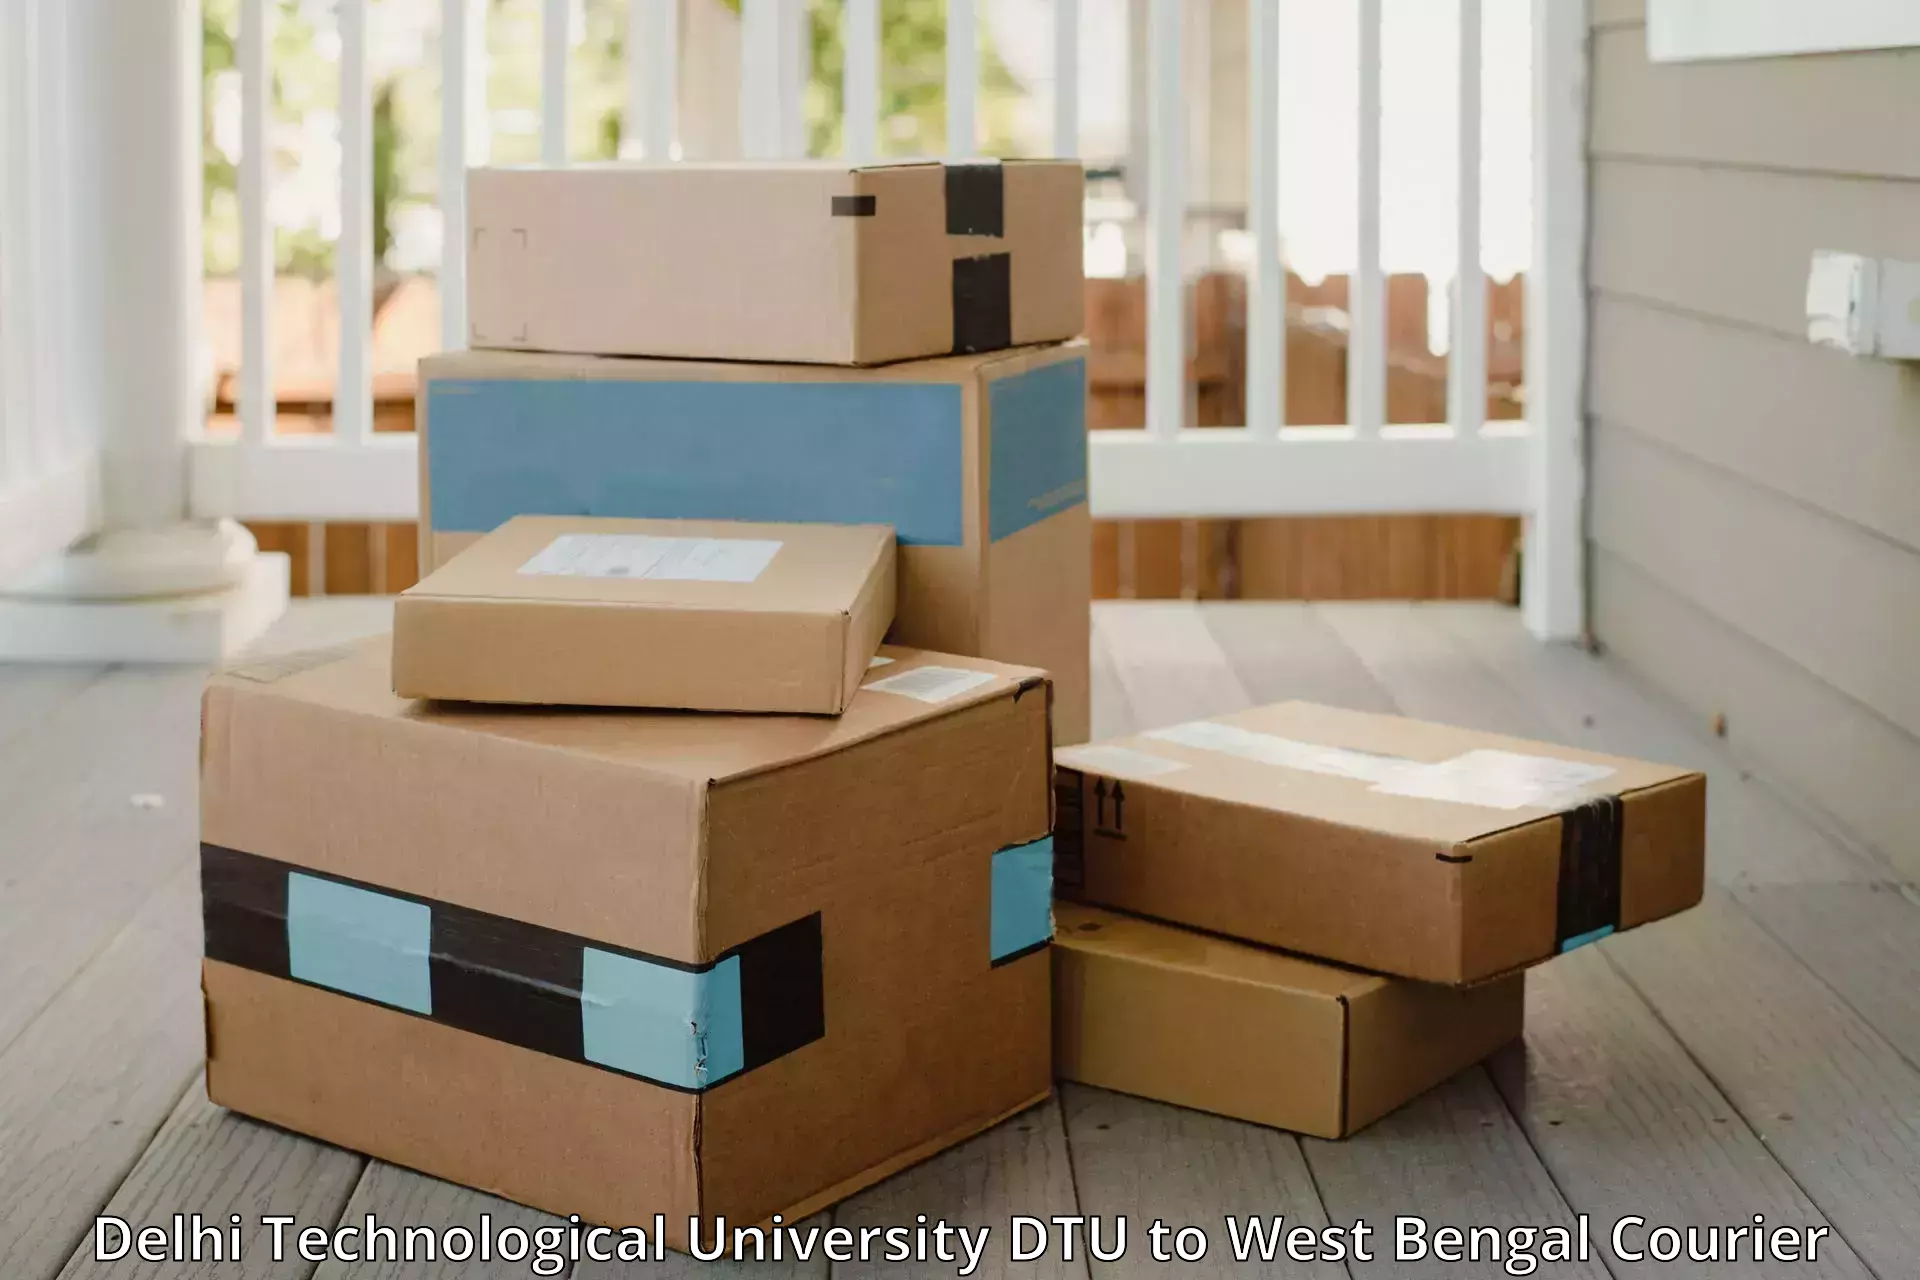 Luggage delivery system in Delhi Technological University DTU to West Bengal